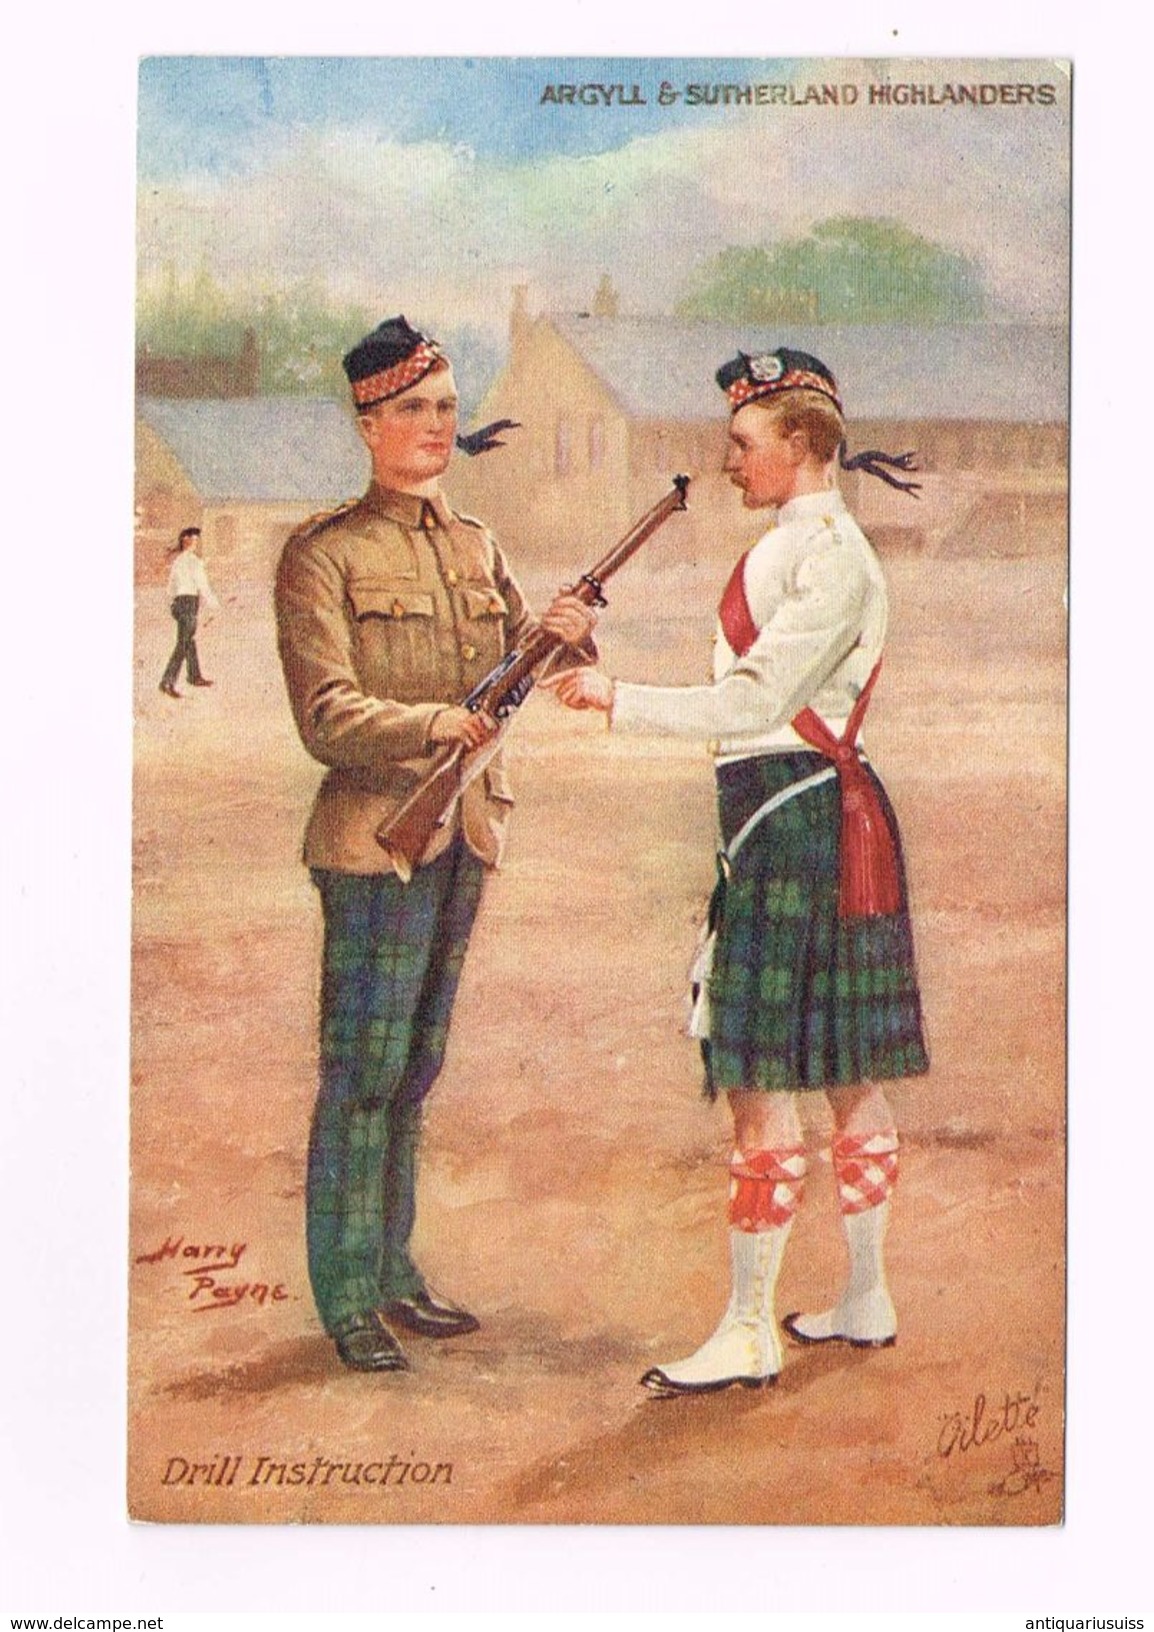 THE ARGYLL AND SUTHERLAND HIGHLANDERS - United Kingdom - Scottish Soldiers- Drill Instruction - Costumes